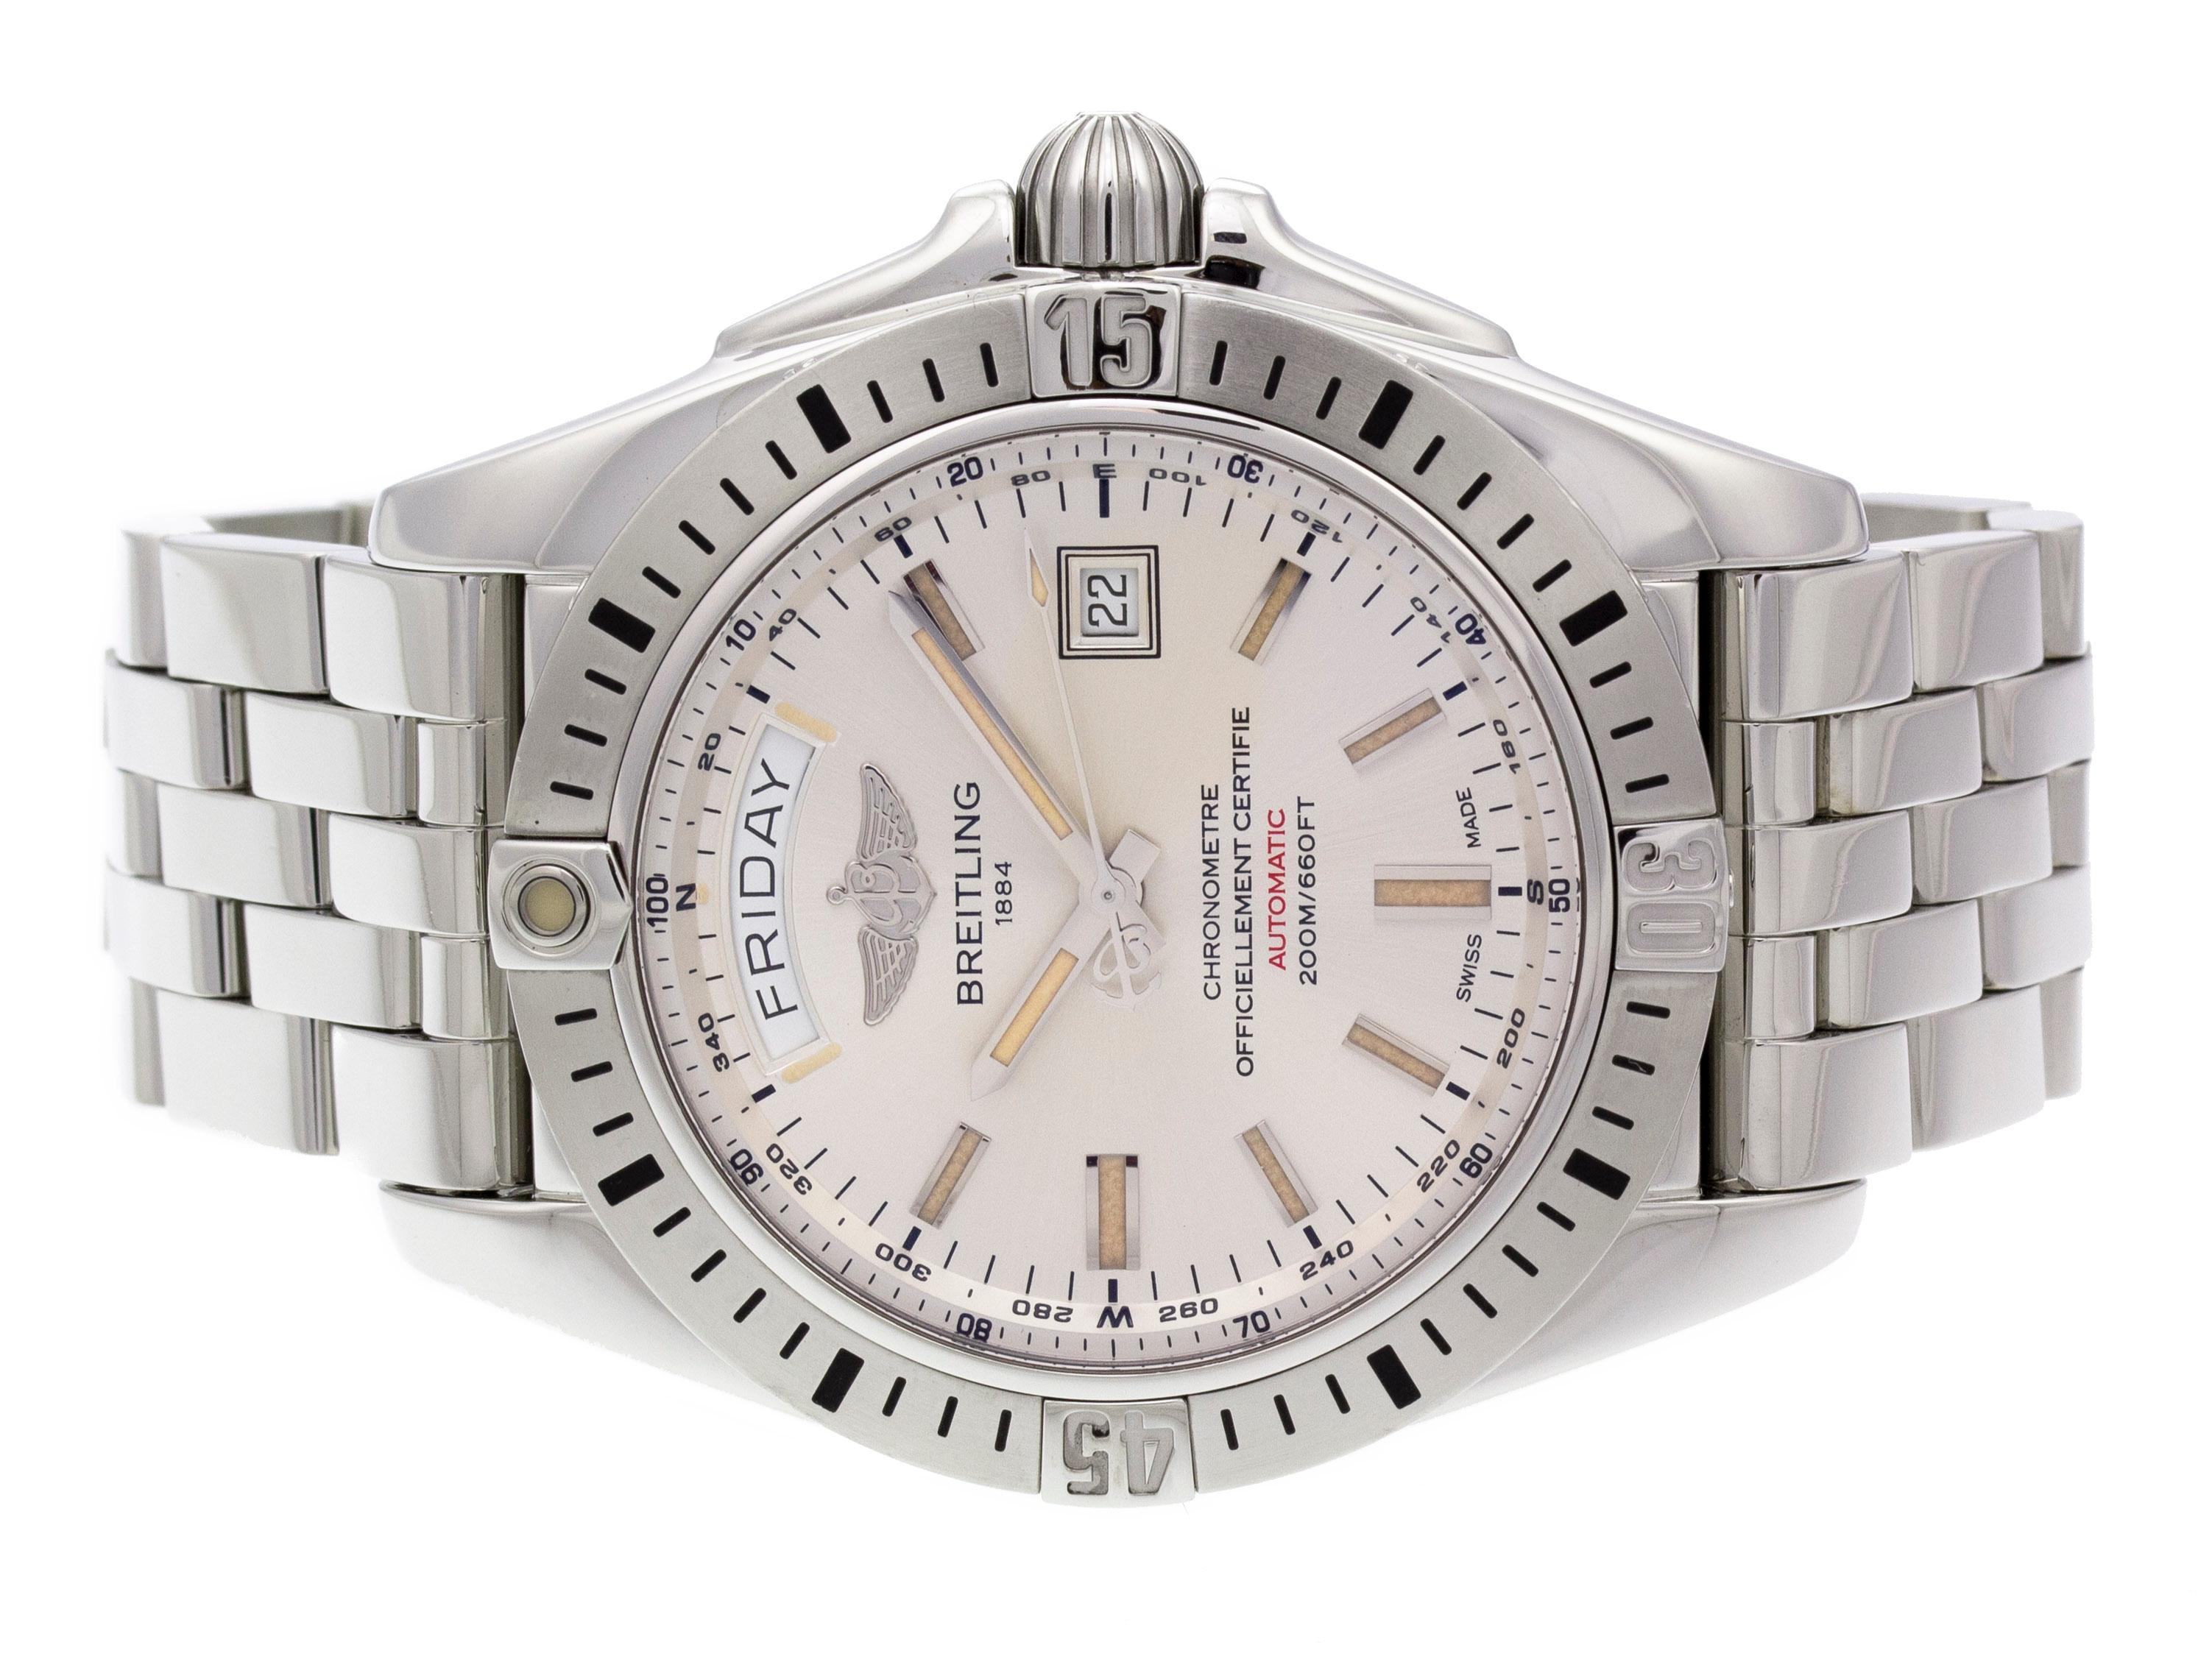 Stainless steel Breitling Galactic 44 Day Date automatic watch with a 44mm case, silver dial, and bracelet with deployment buckle. Features include hours, minutes, seconds, day, and date. Comes with Gift Box and 2 Year Store